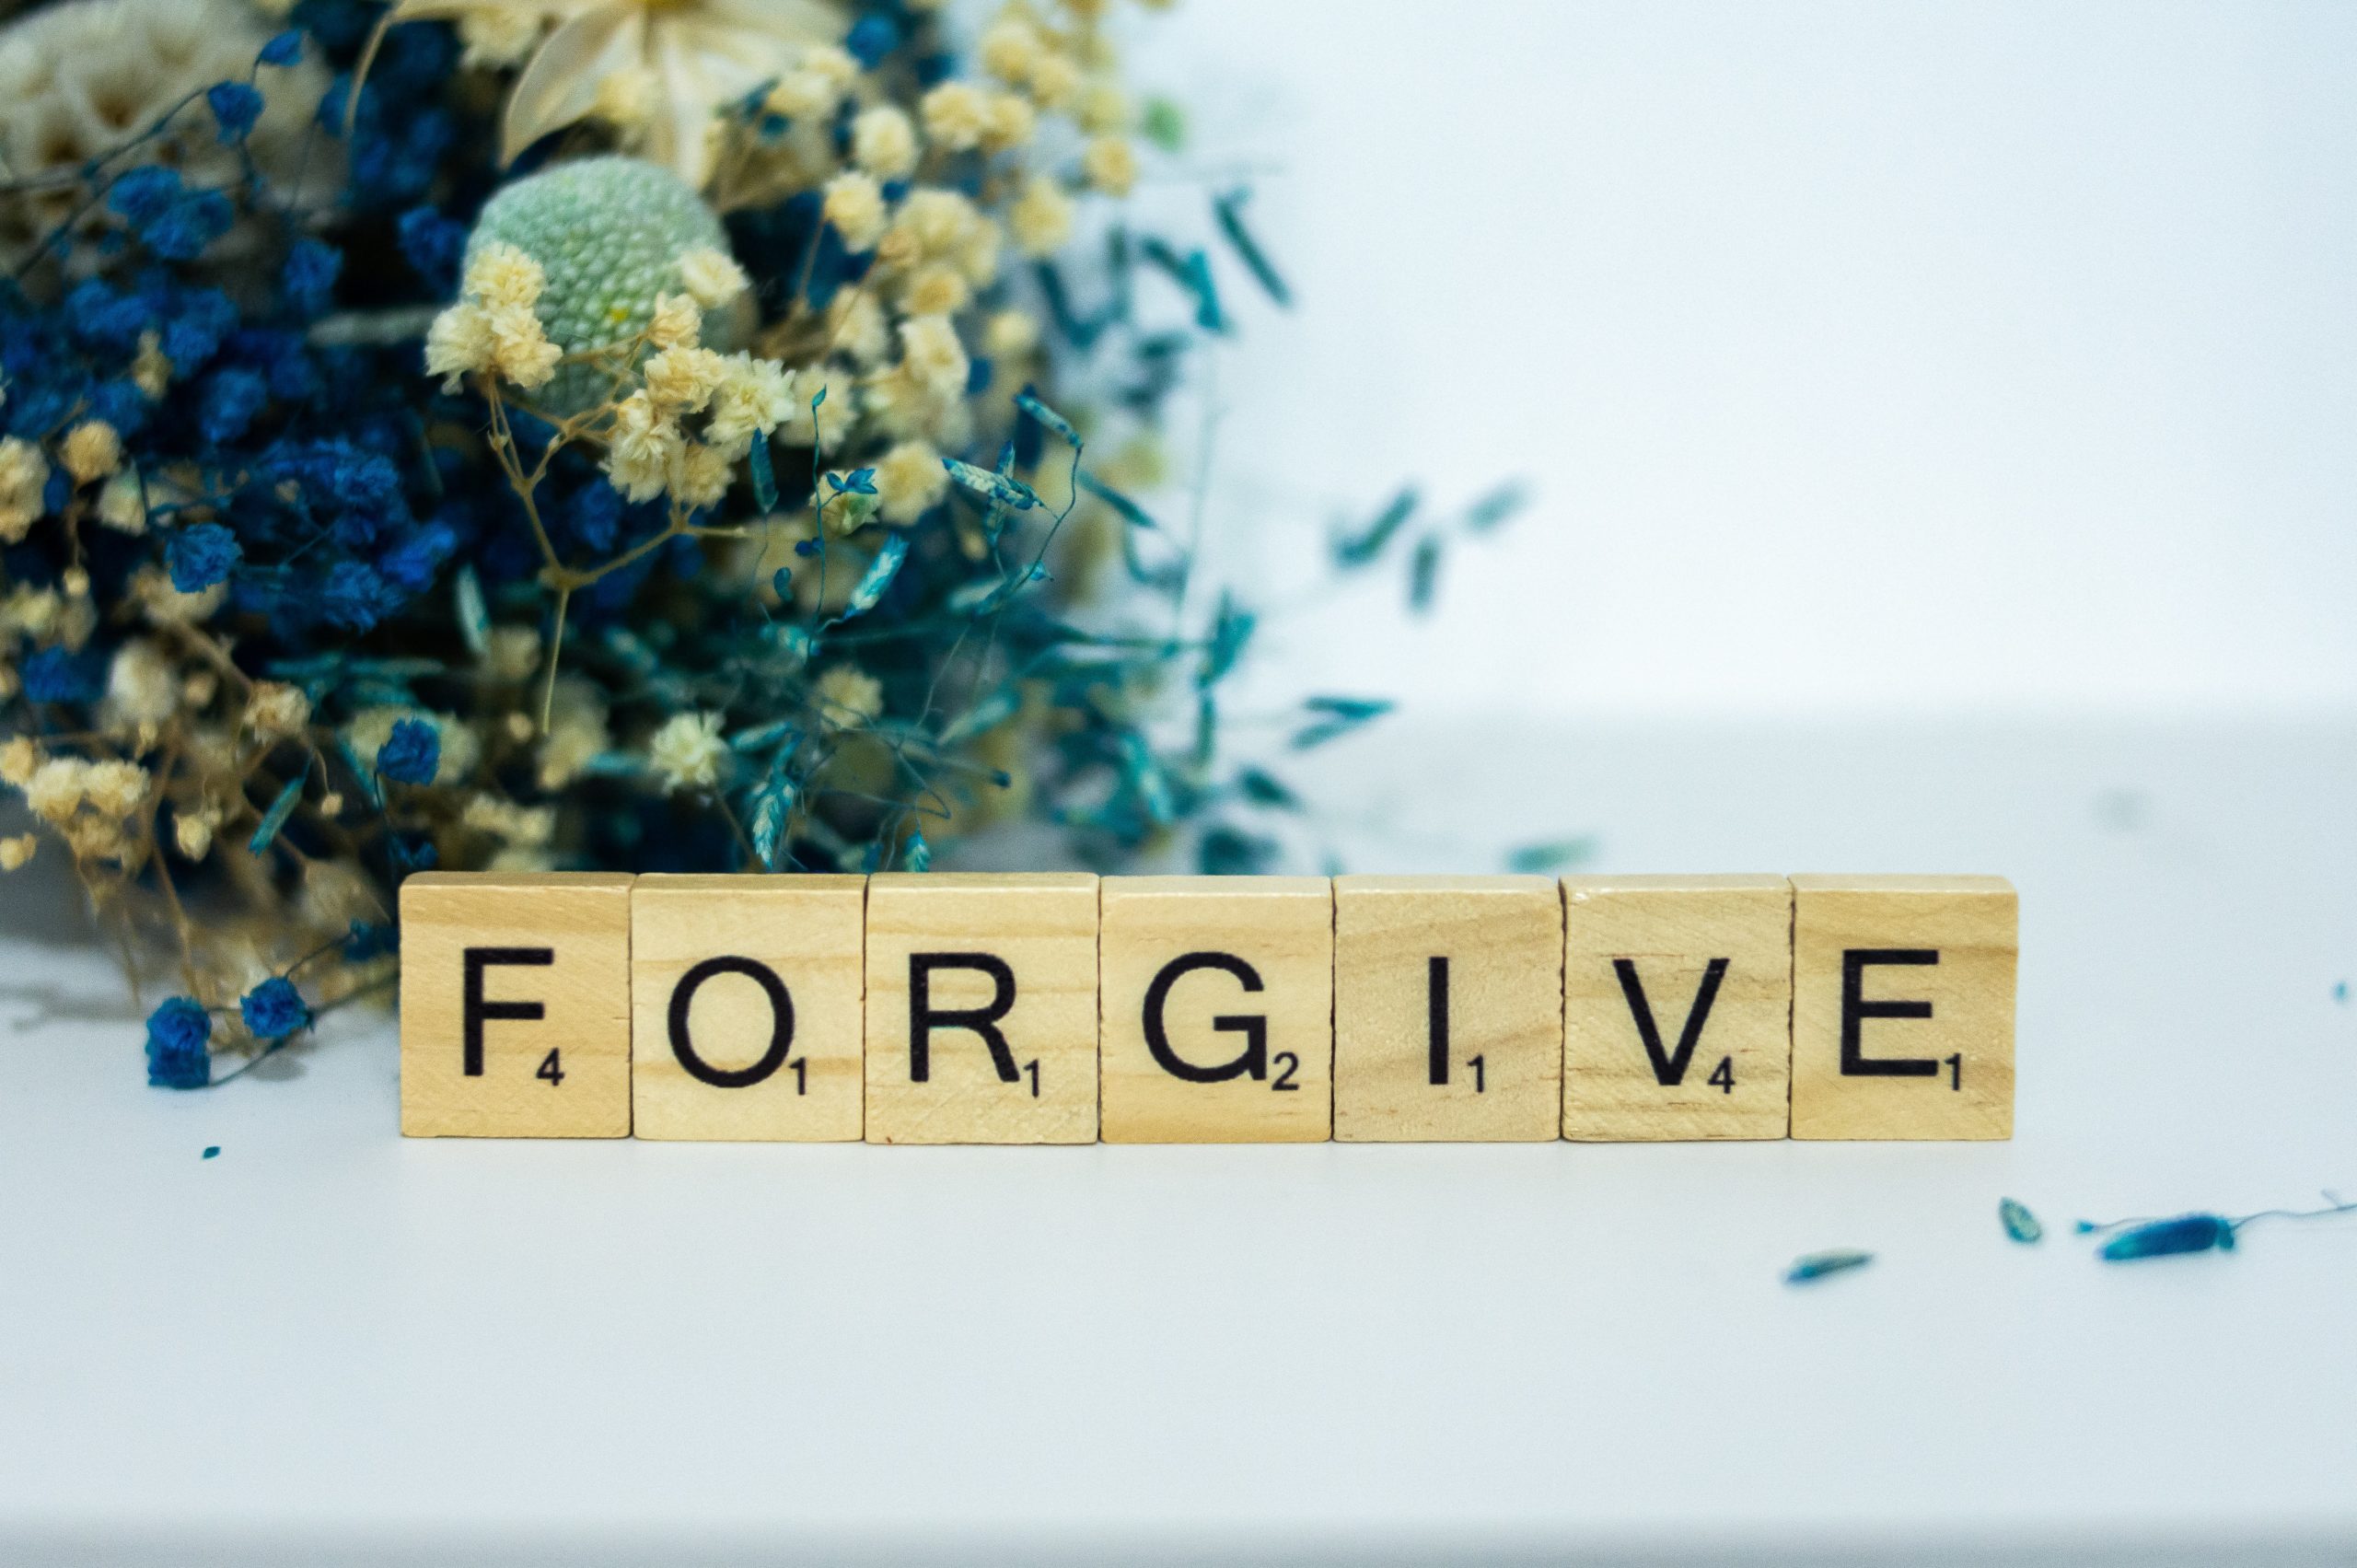 "Forgive" spelled out with scrabble letters